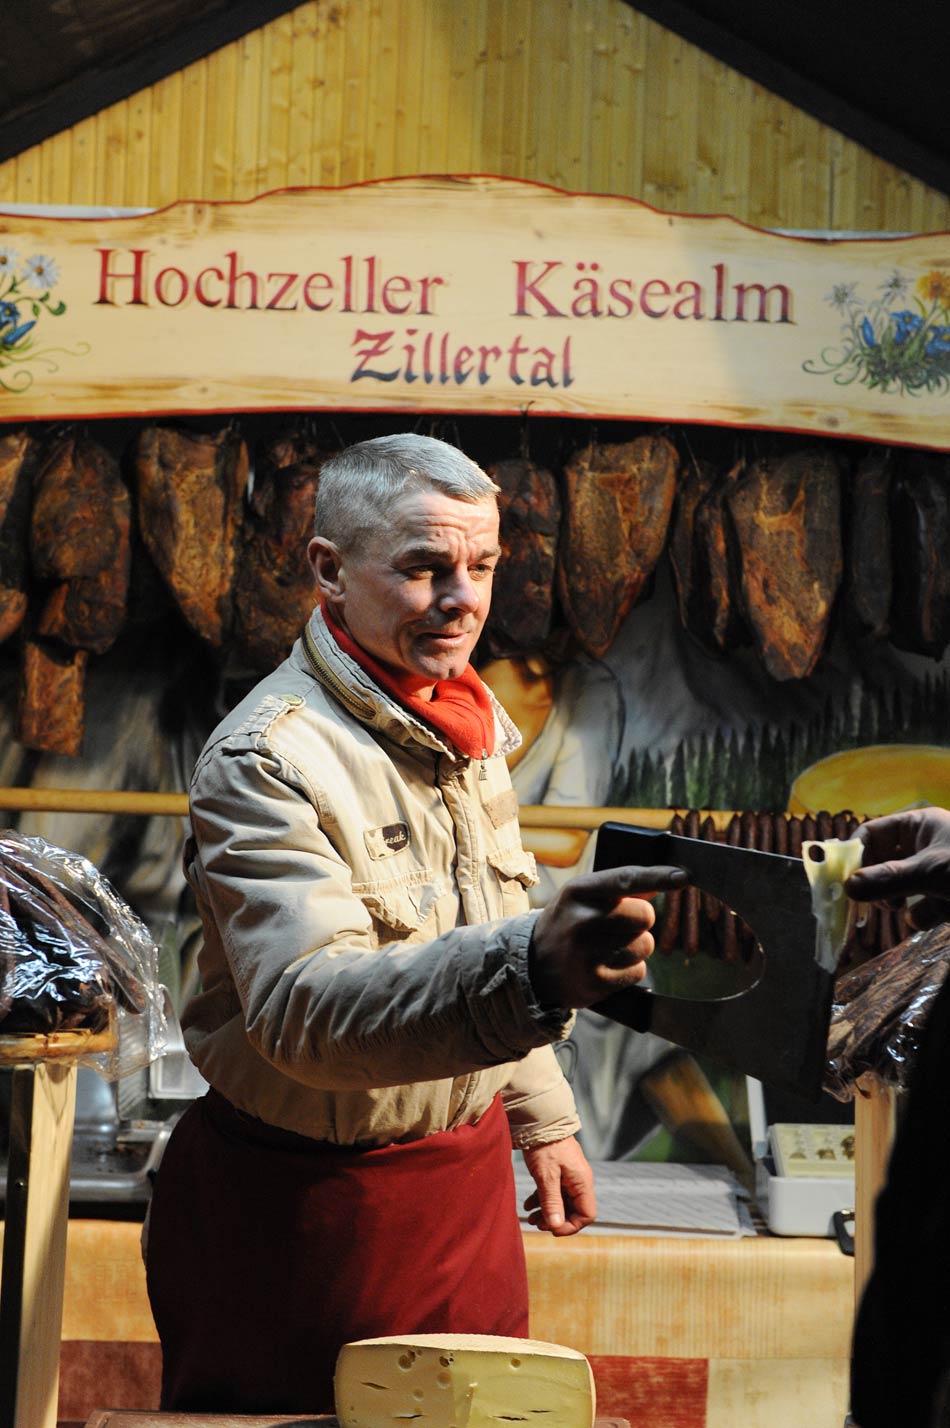 A shopkeeper sells German cheese in the Christmas market at the  Charlottenburg Palace, Berlin, capital of Germany, on Nov. 26, 2012. Since the Western traditional holiday Christmas is approaching, Christmas markets have opened one after another in Berlin. (Xinhua/Ban Wei)